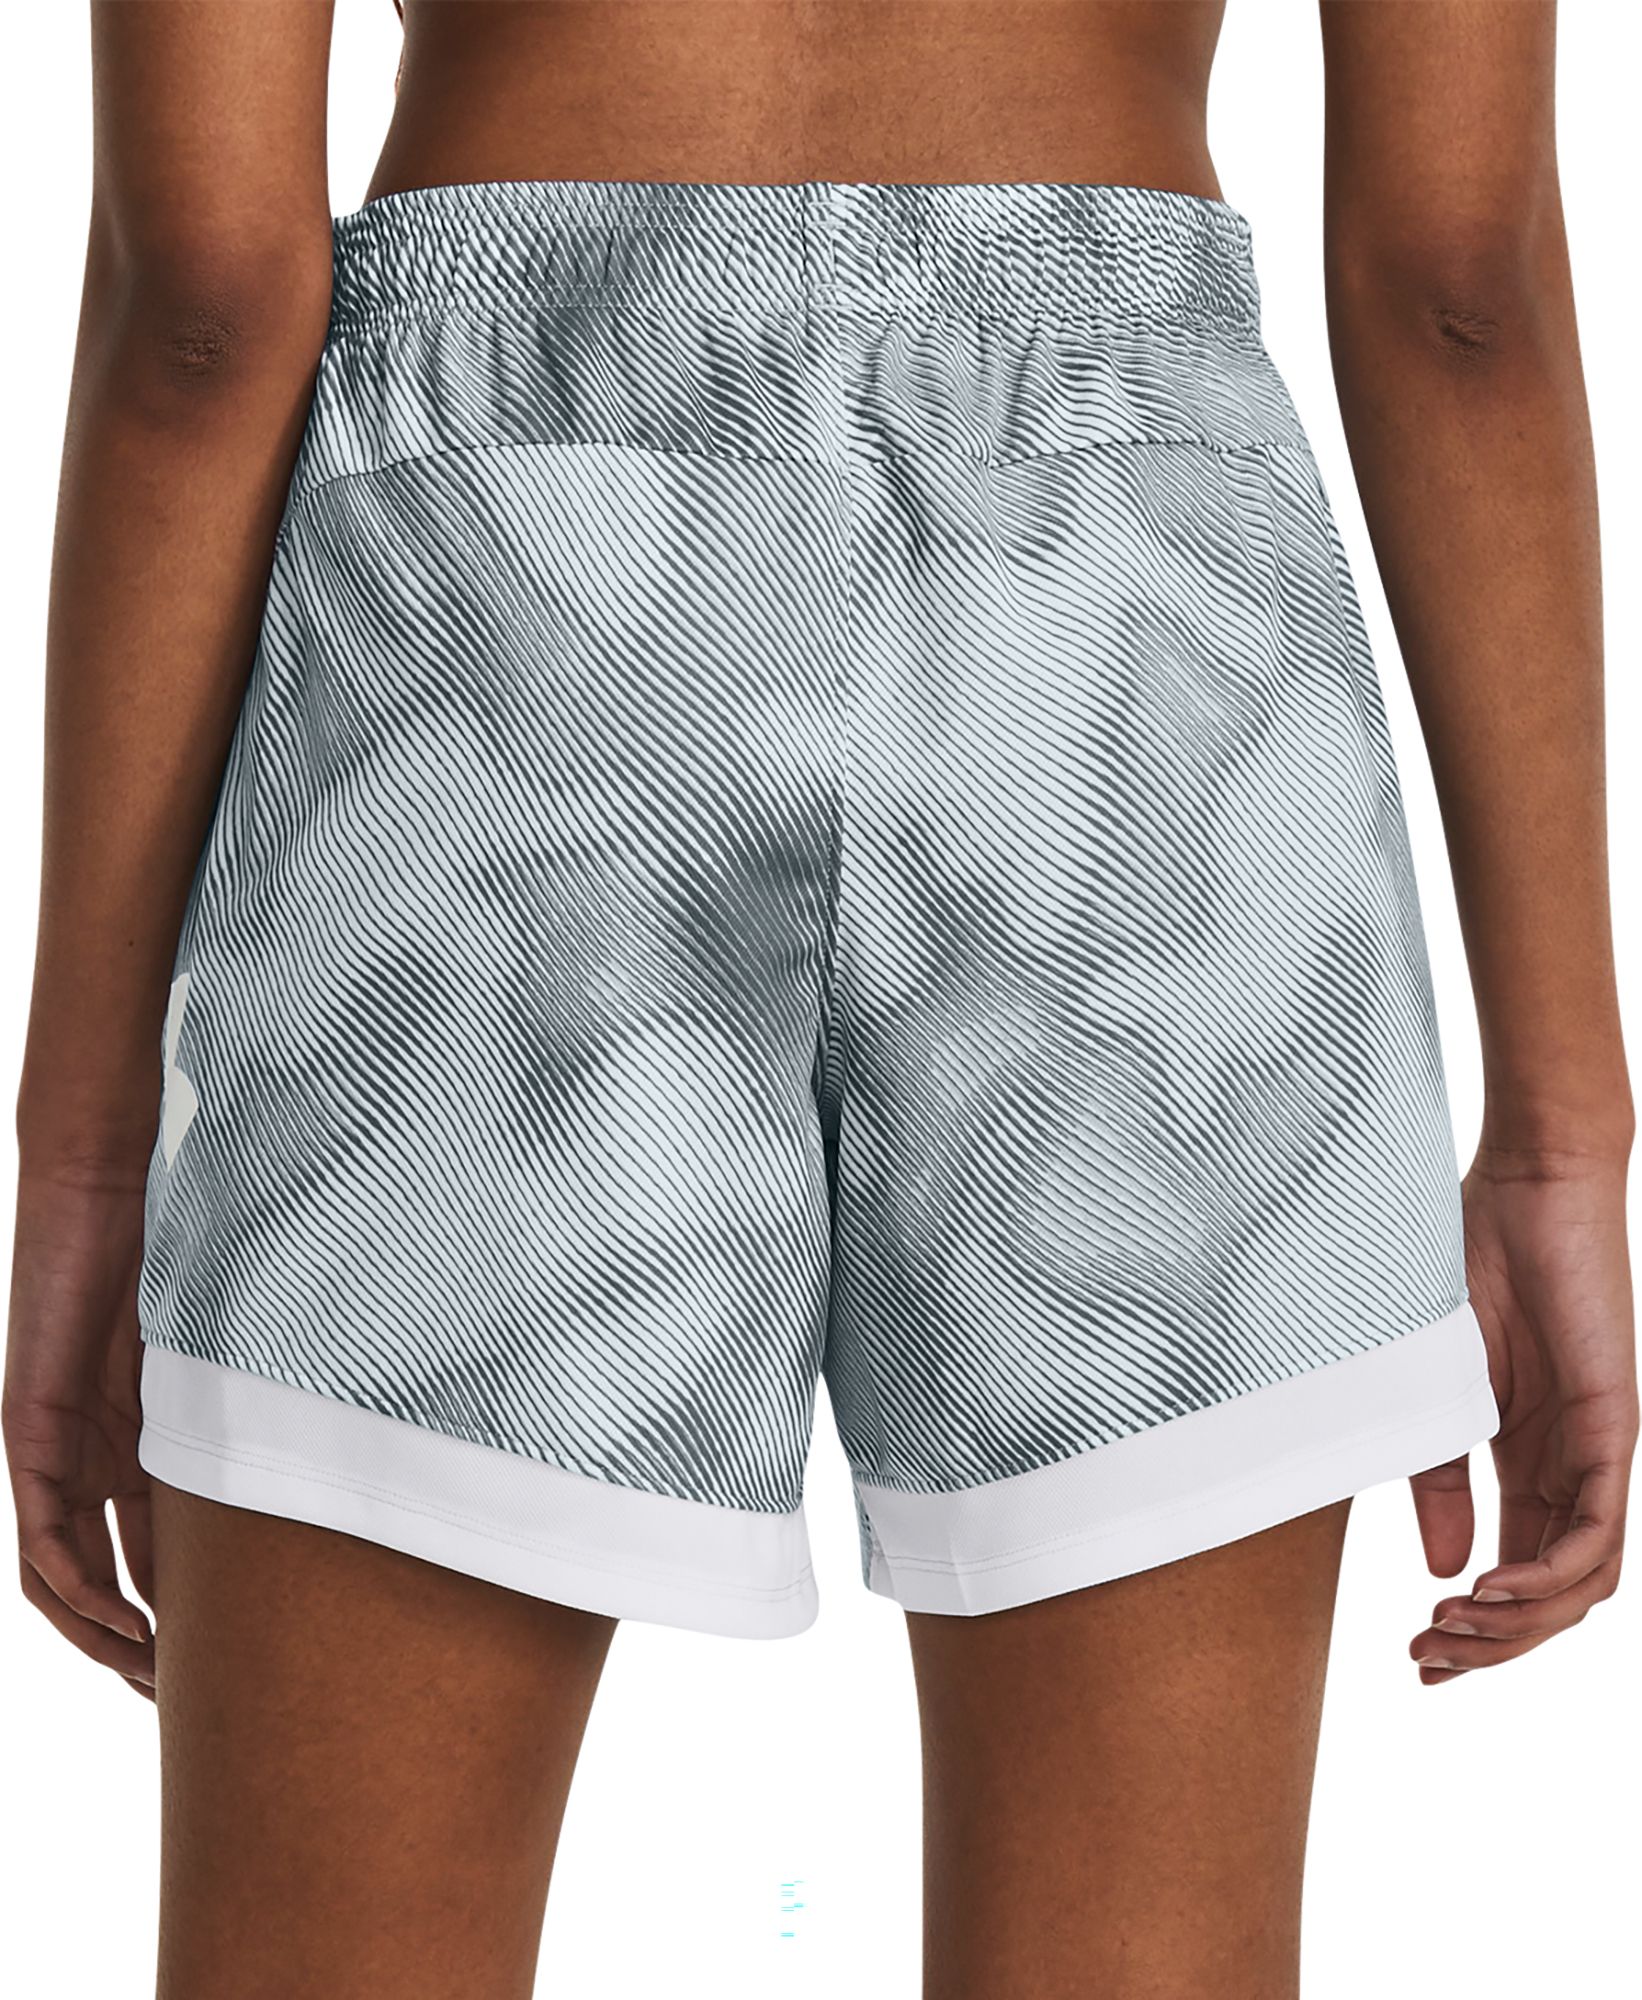 Under Armour Women's Baselines 6” Lino Shorts